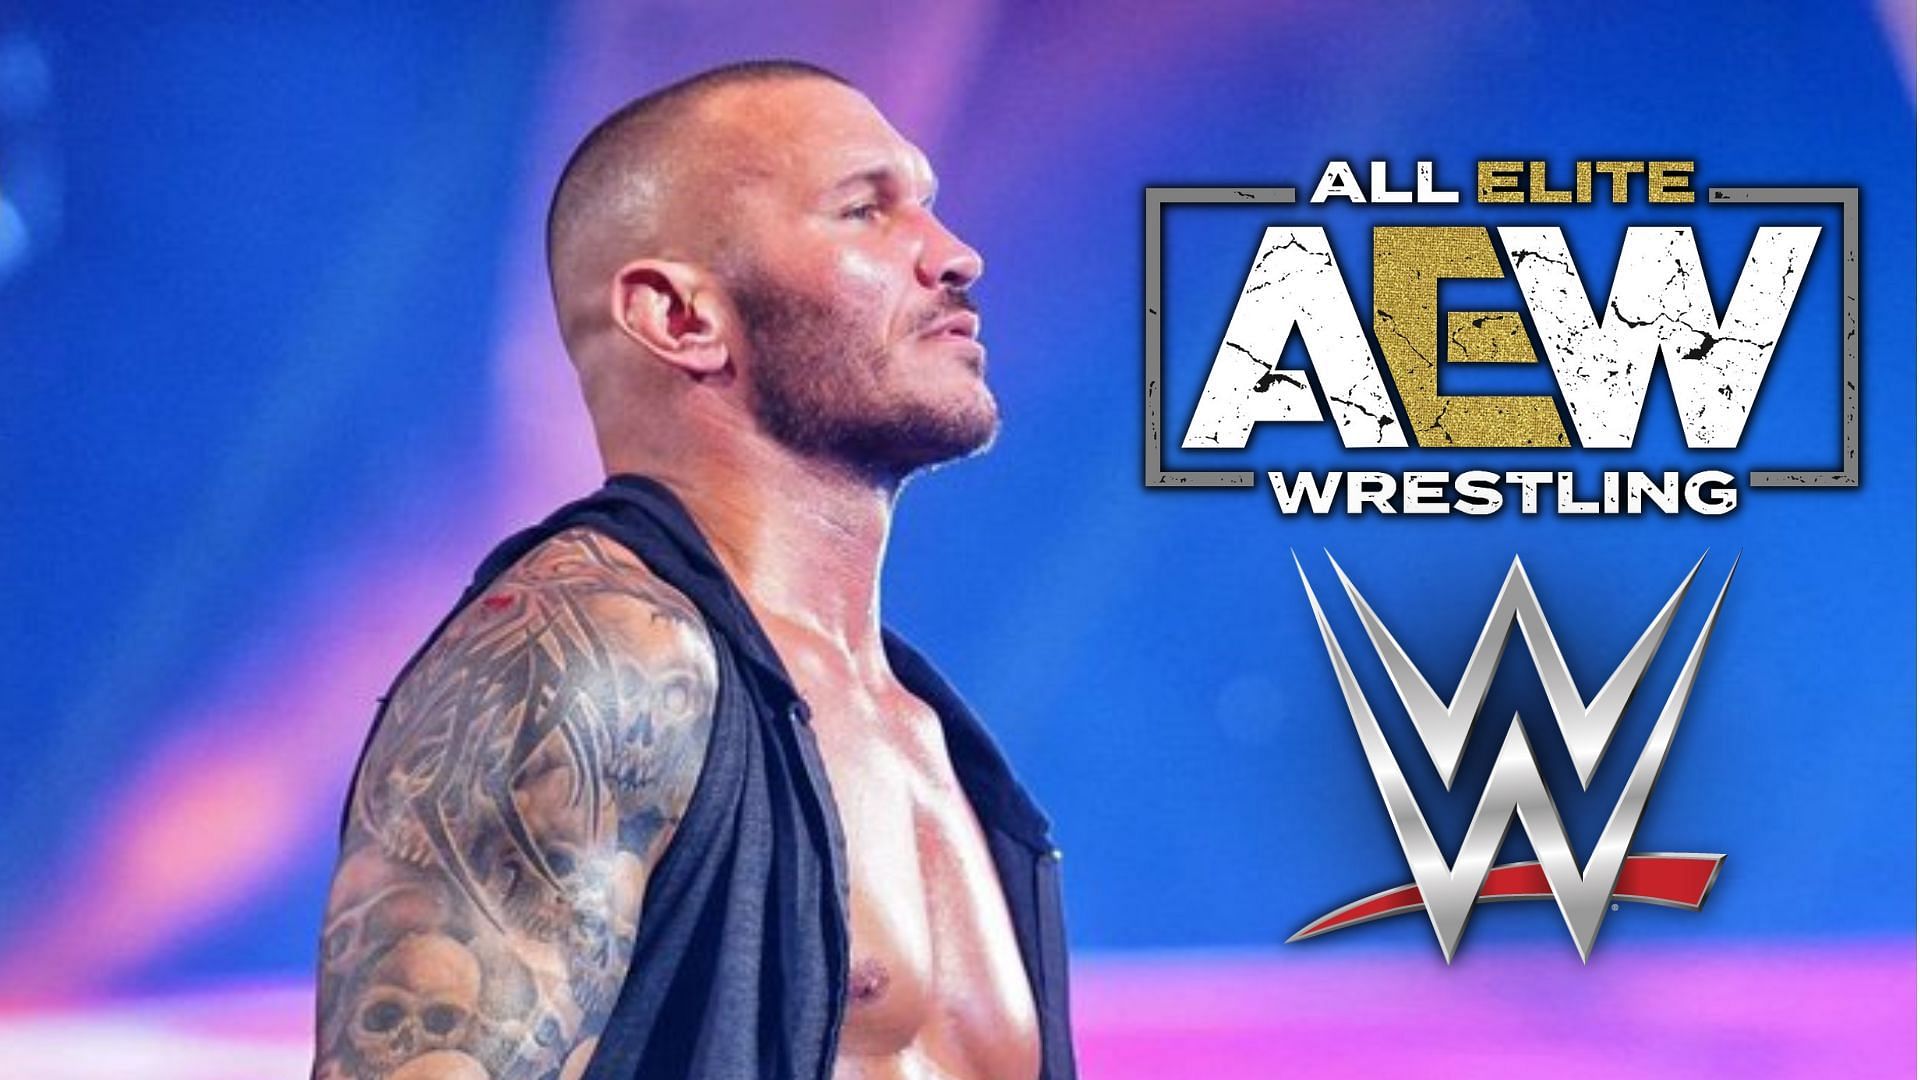 Randy Orton is still out of action